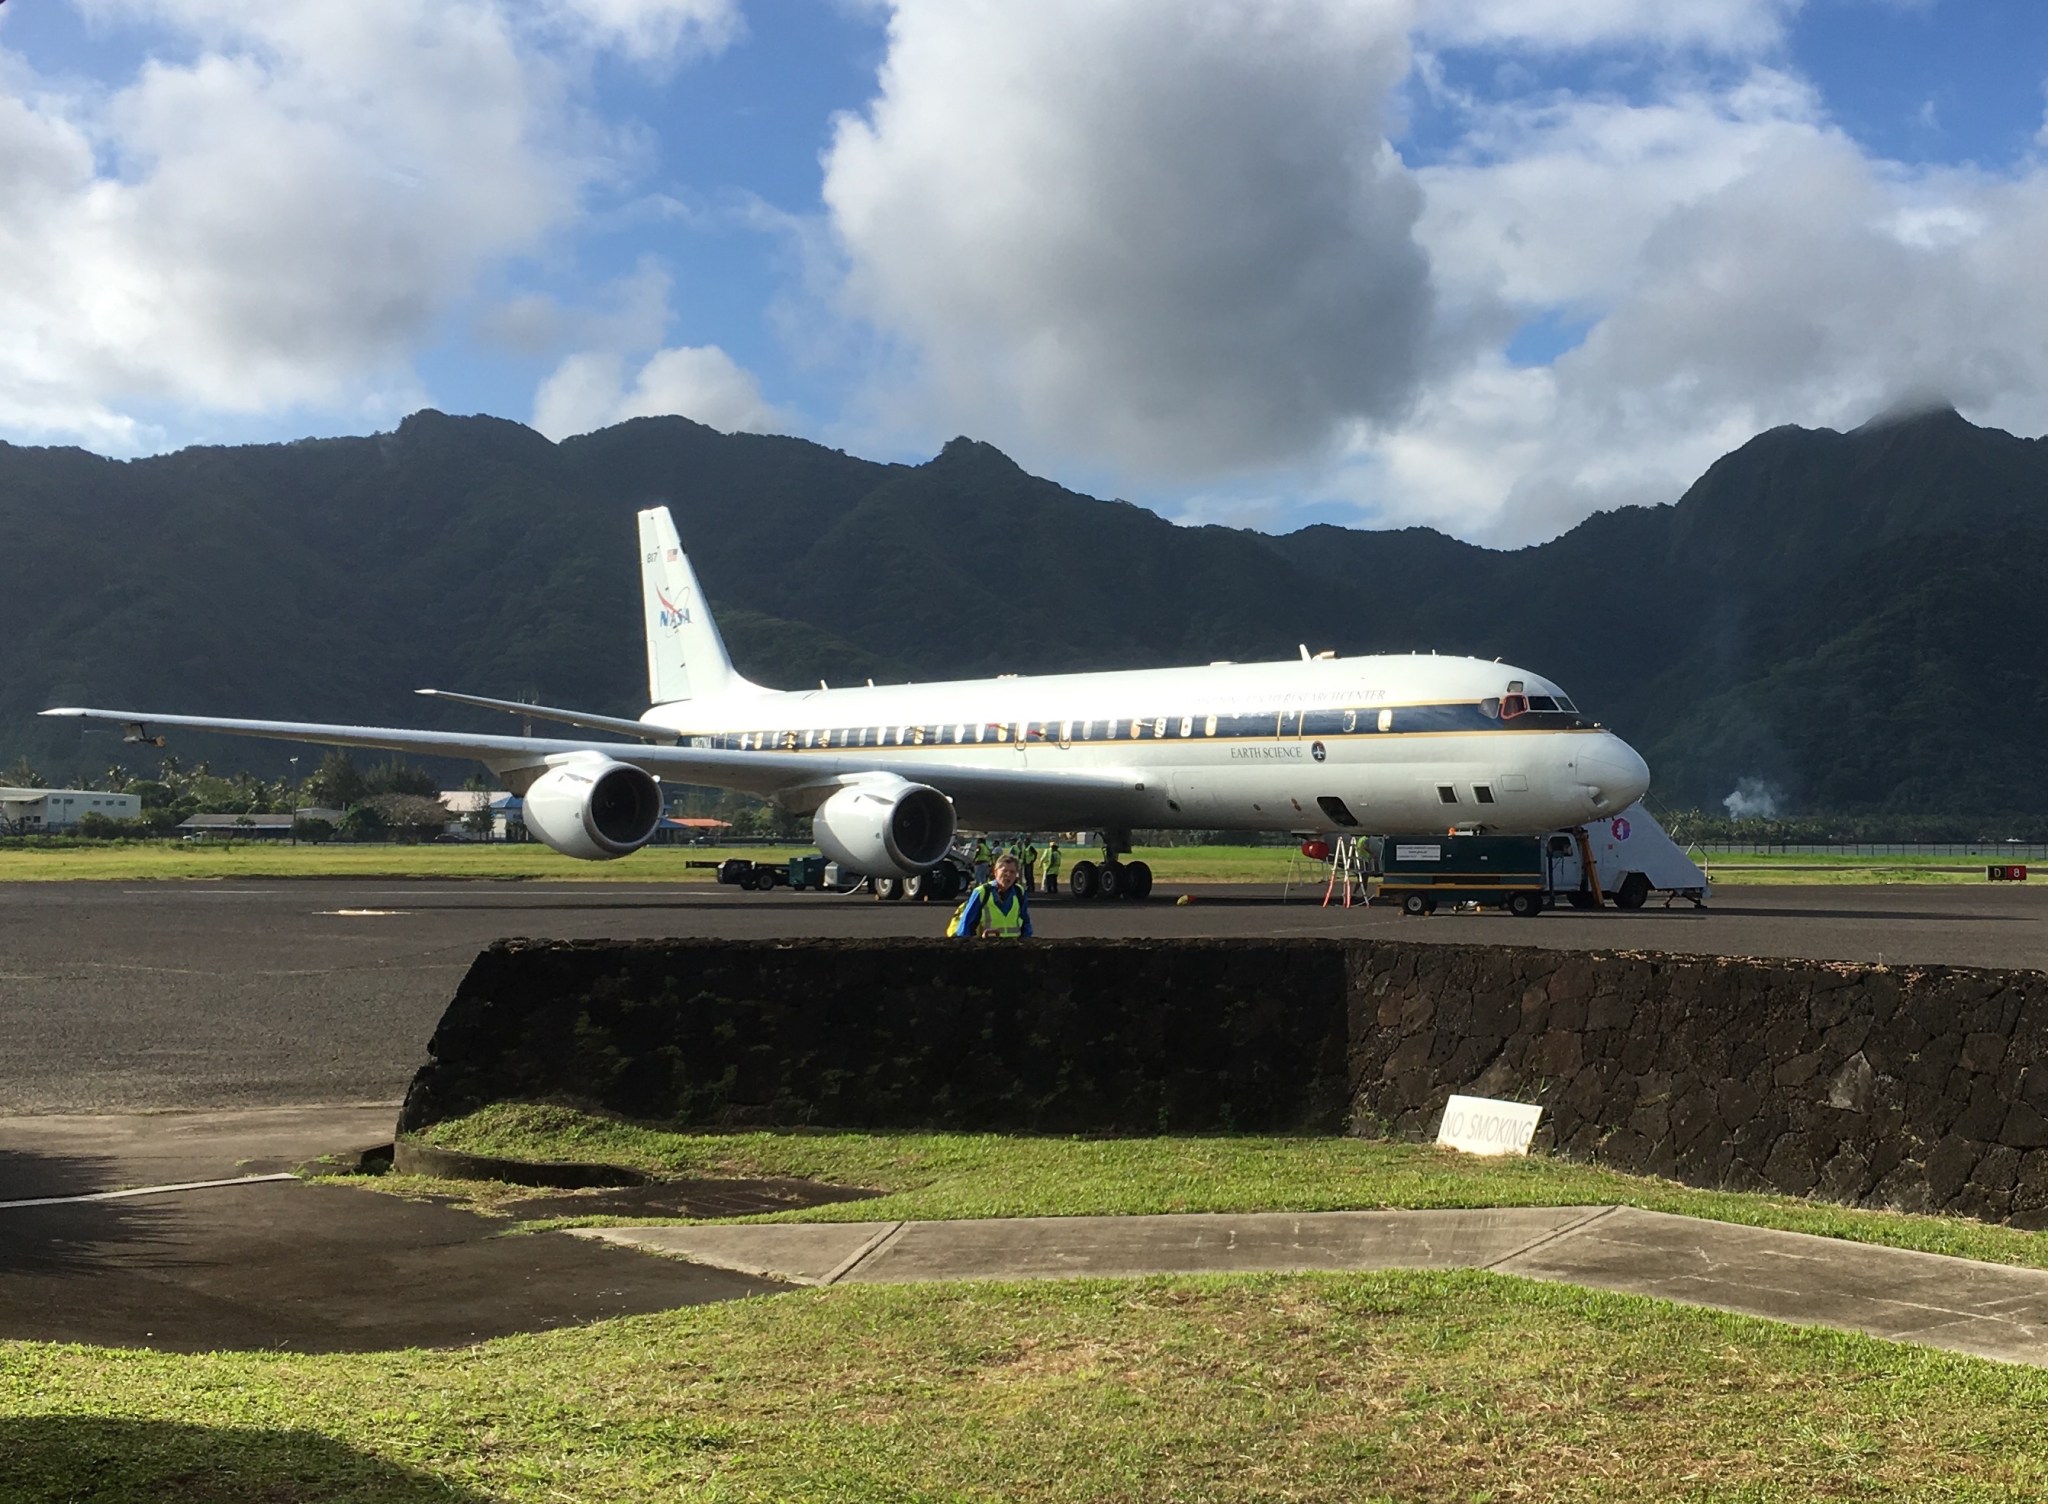 NASA’s DC-8 flying laboratory stopped in American Samoa during the first round of ATom flights that took place in Summer 2016.